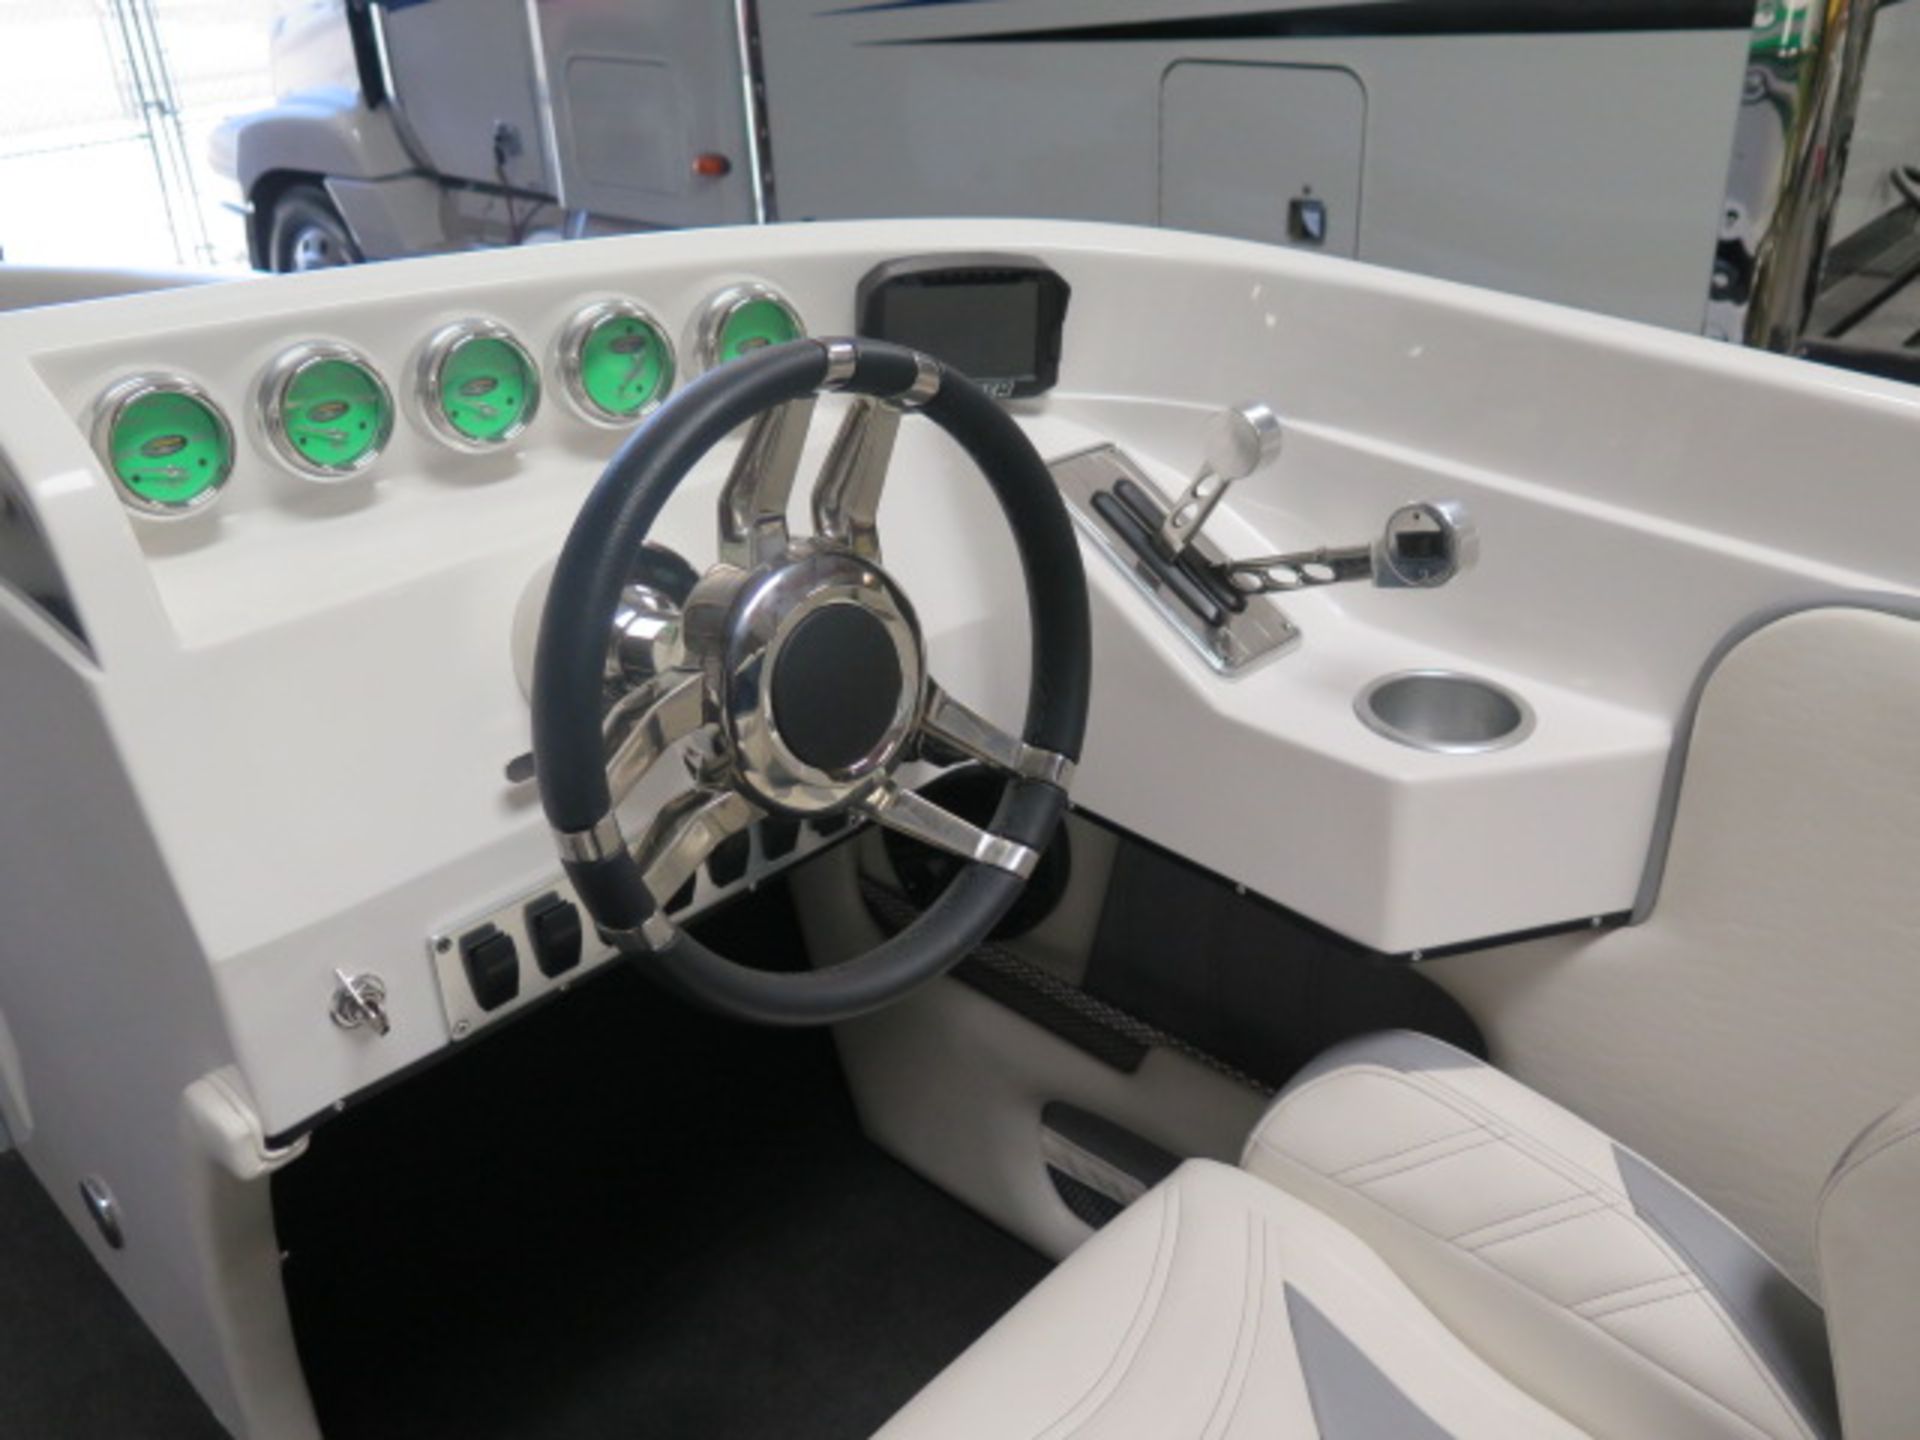 2020 Laveycraft 24' V-Bottom Open Bow Boat w/ Custon Martinez Interior, Boostpower 675Hp, SOLD AS IS - Image 20 of 40